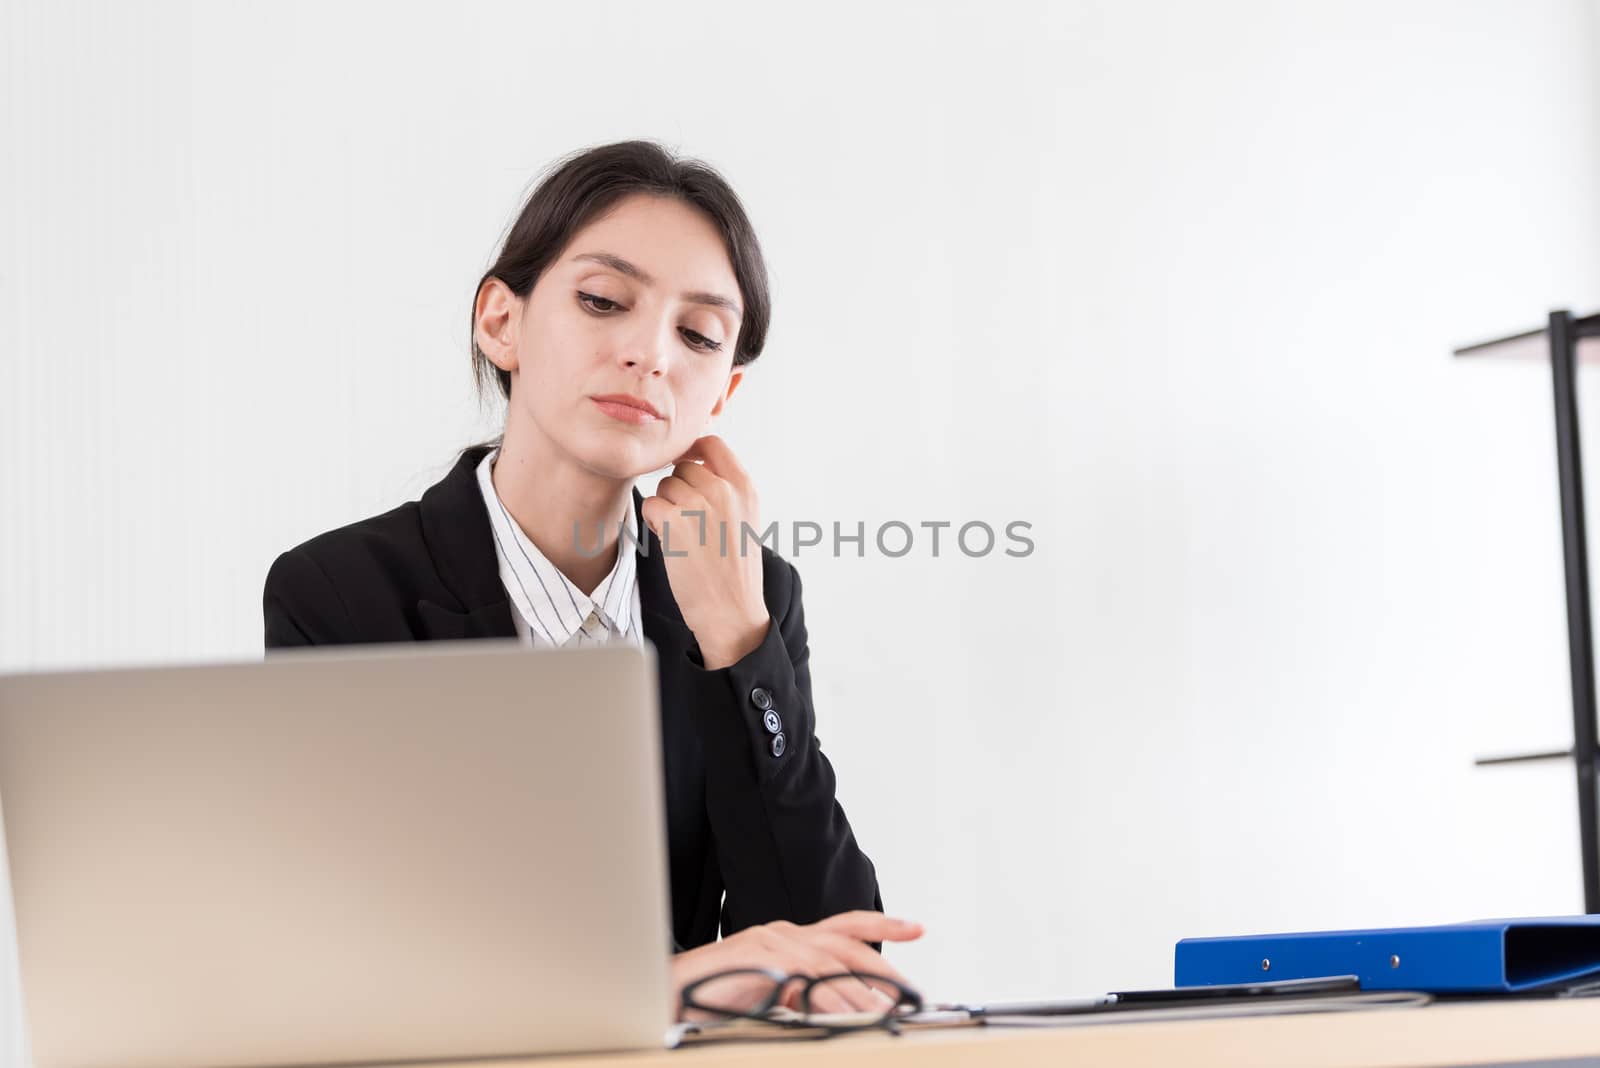 A businesswoman has concentrate working with and upset and unhappy.